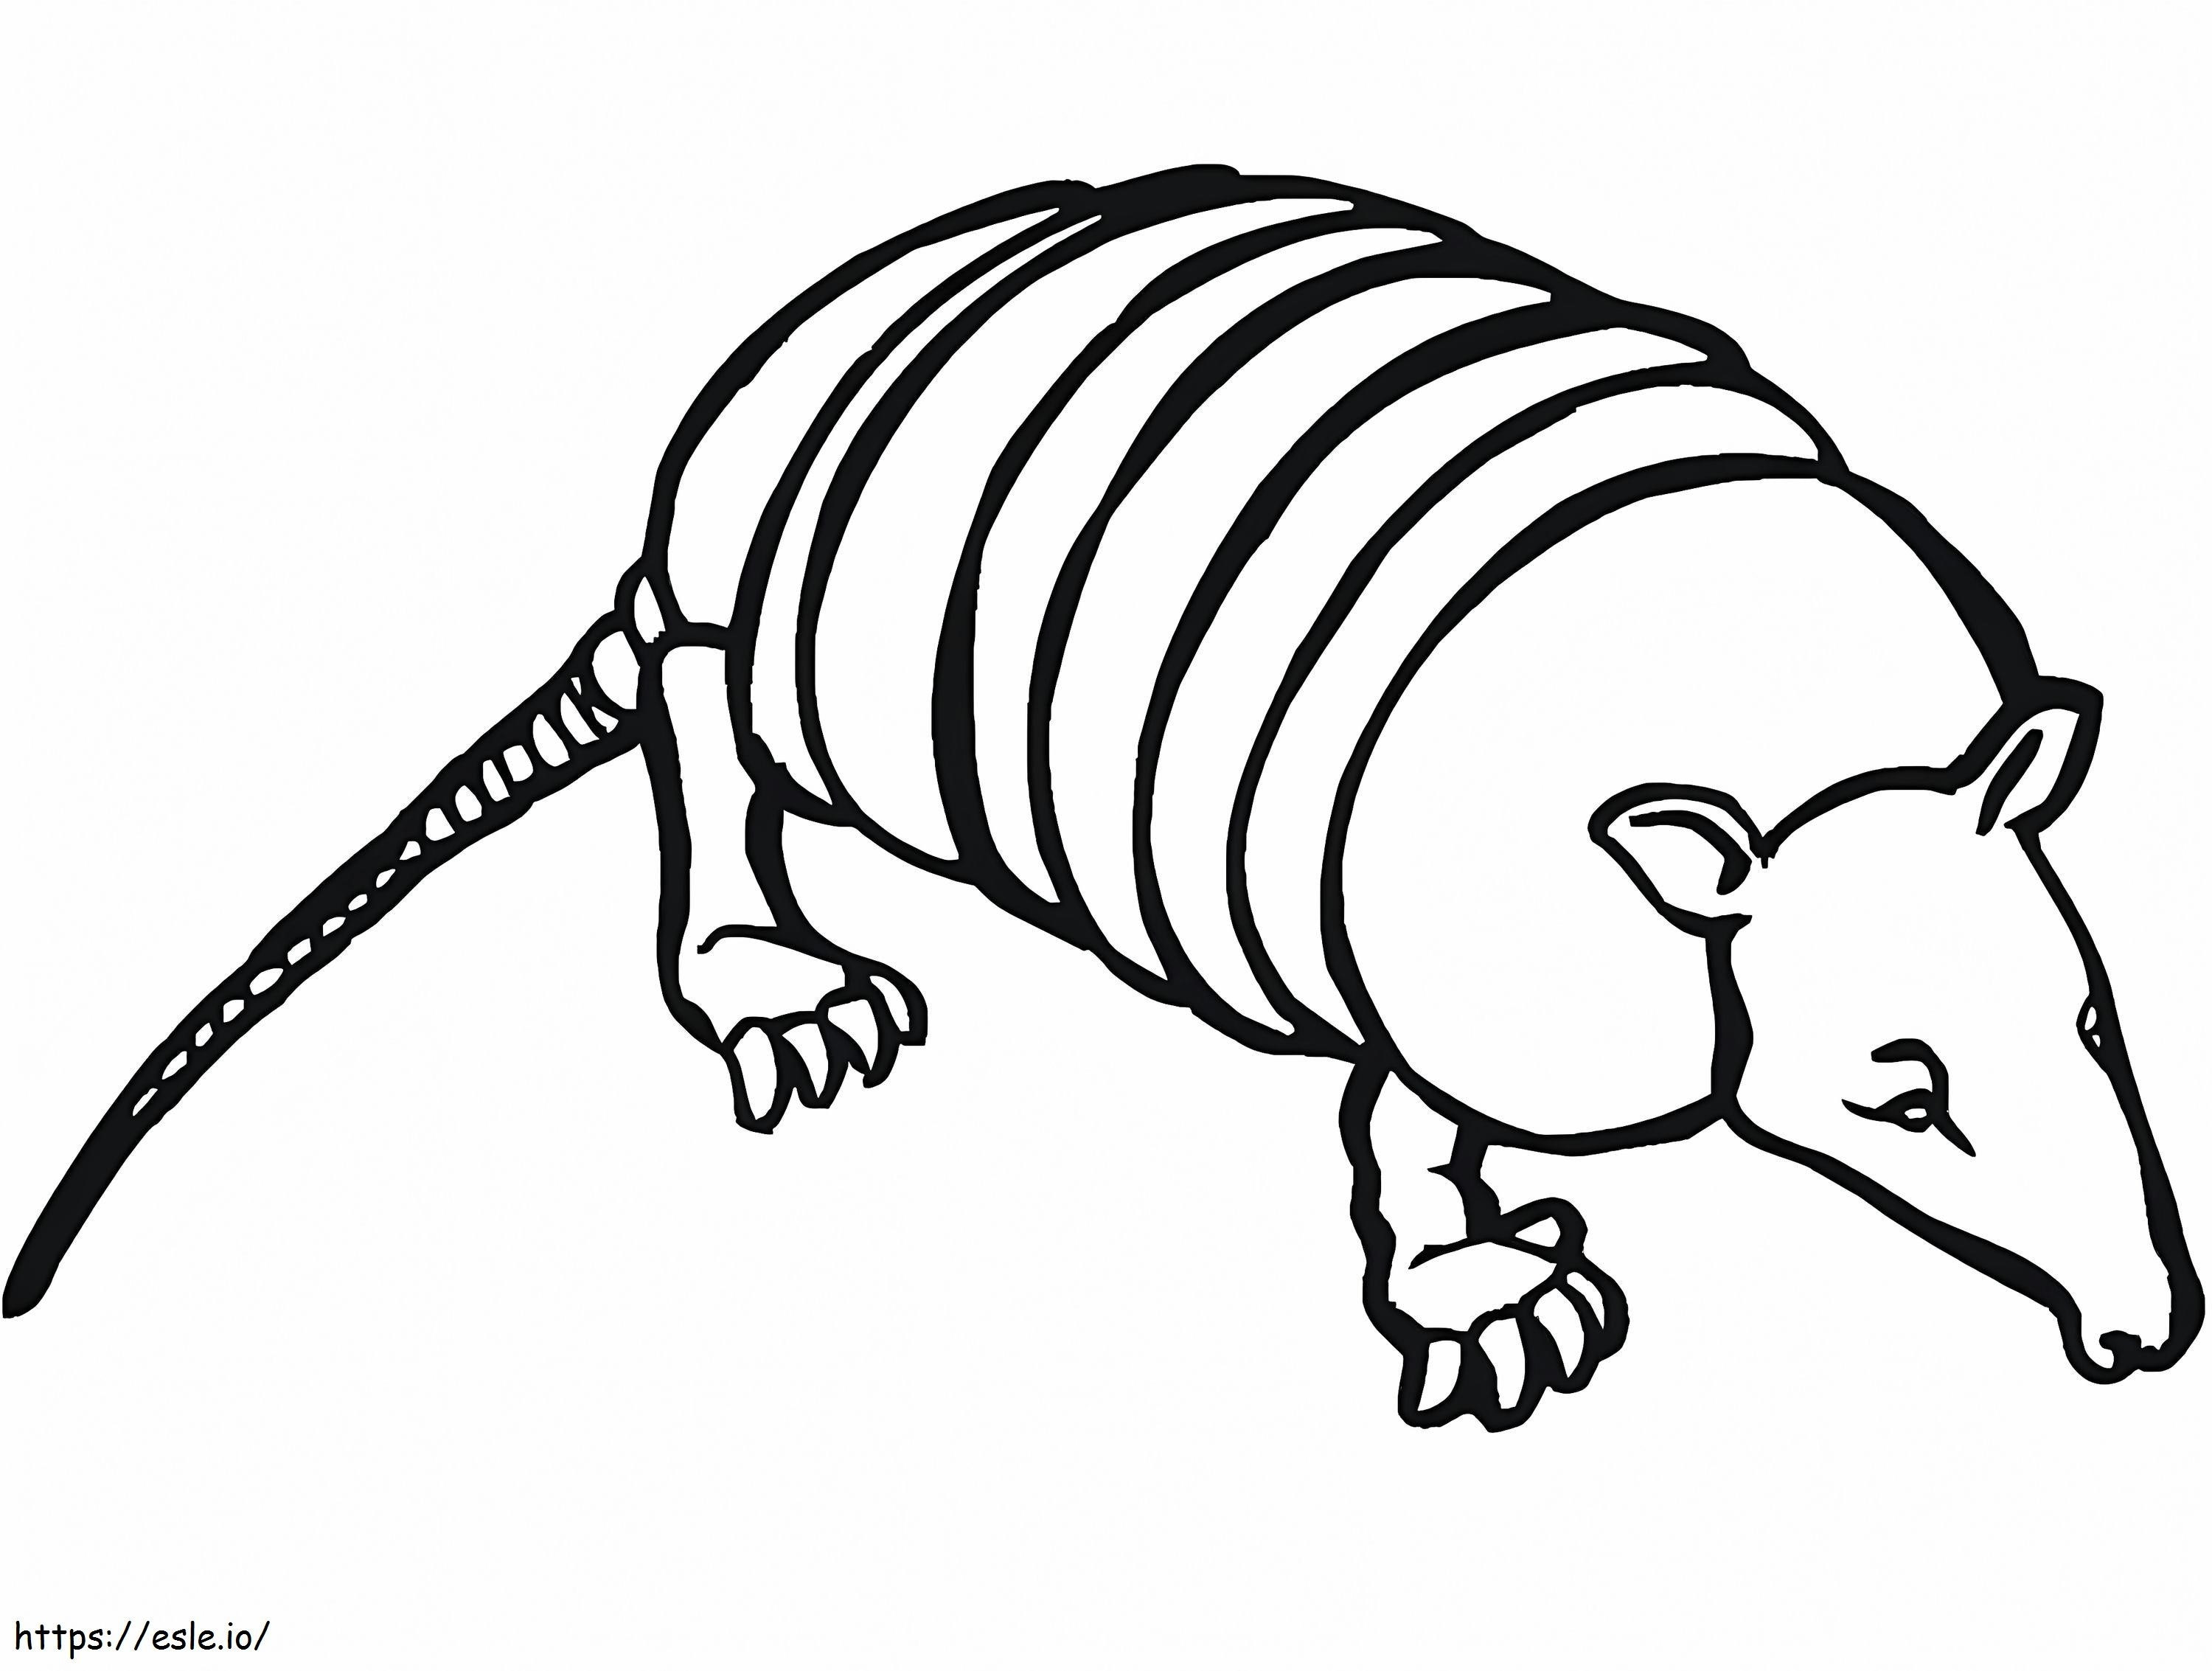 Free Printable Armadilo coloring page